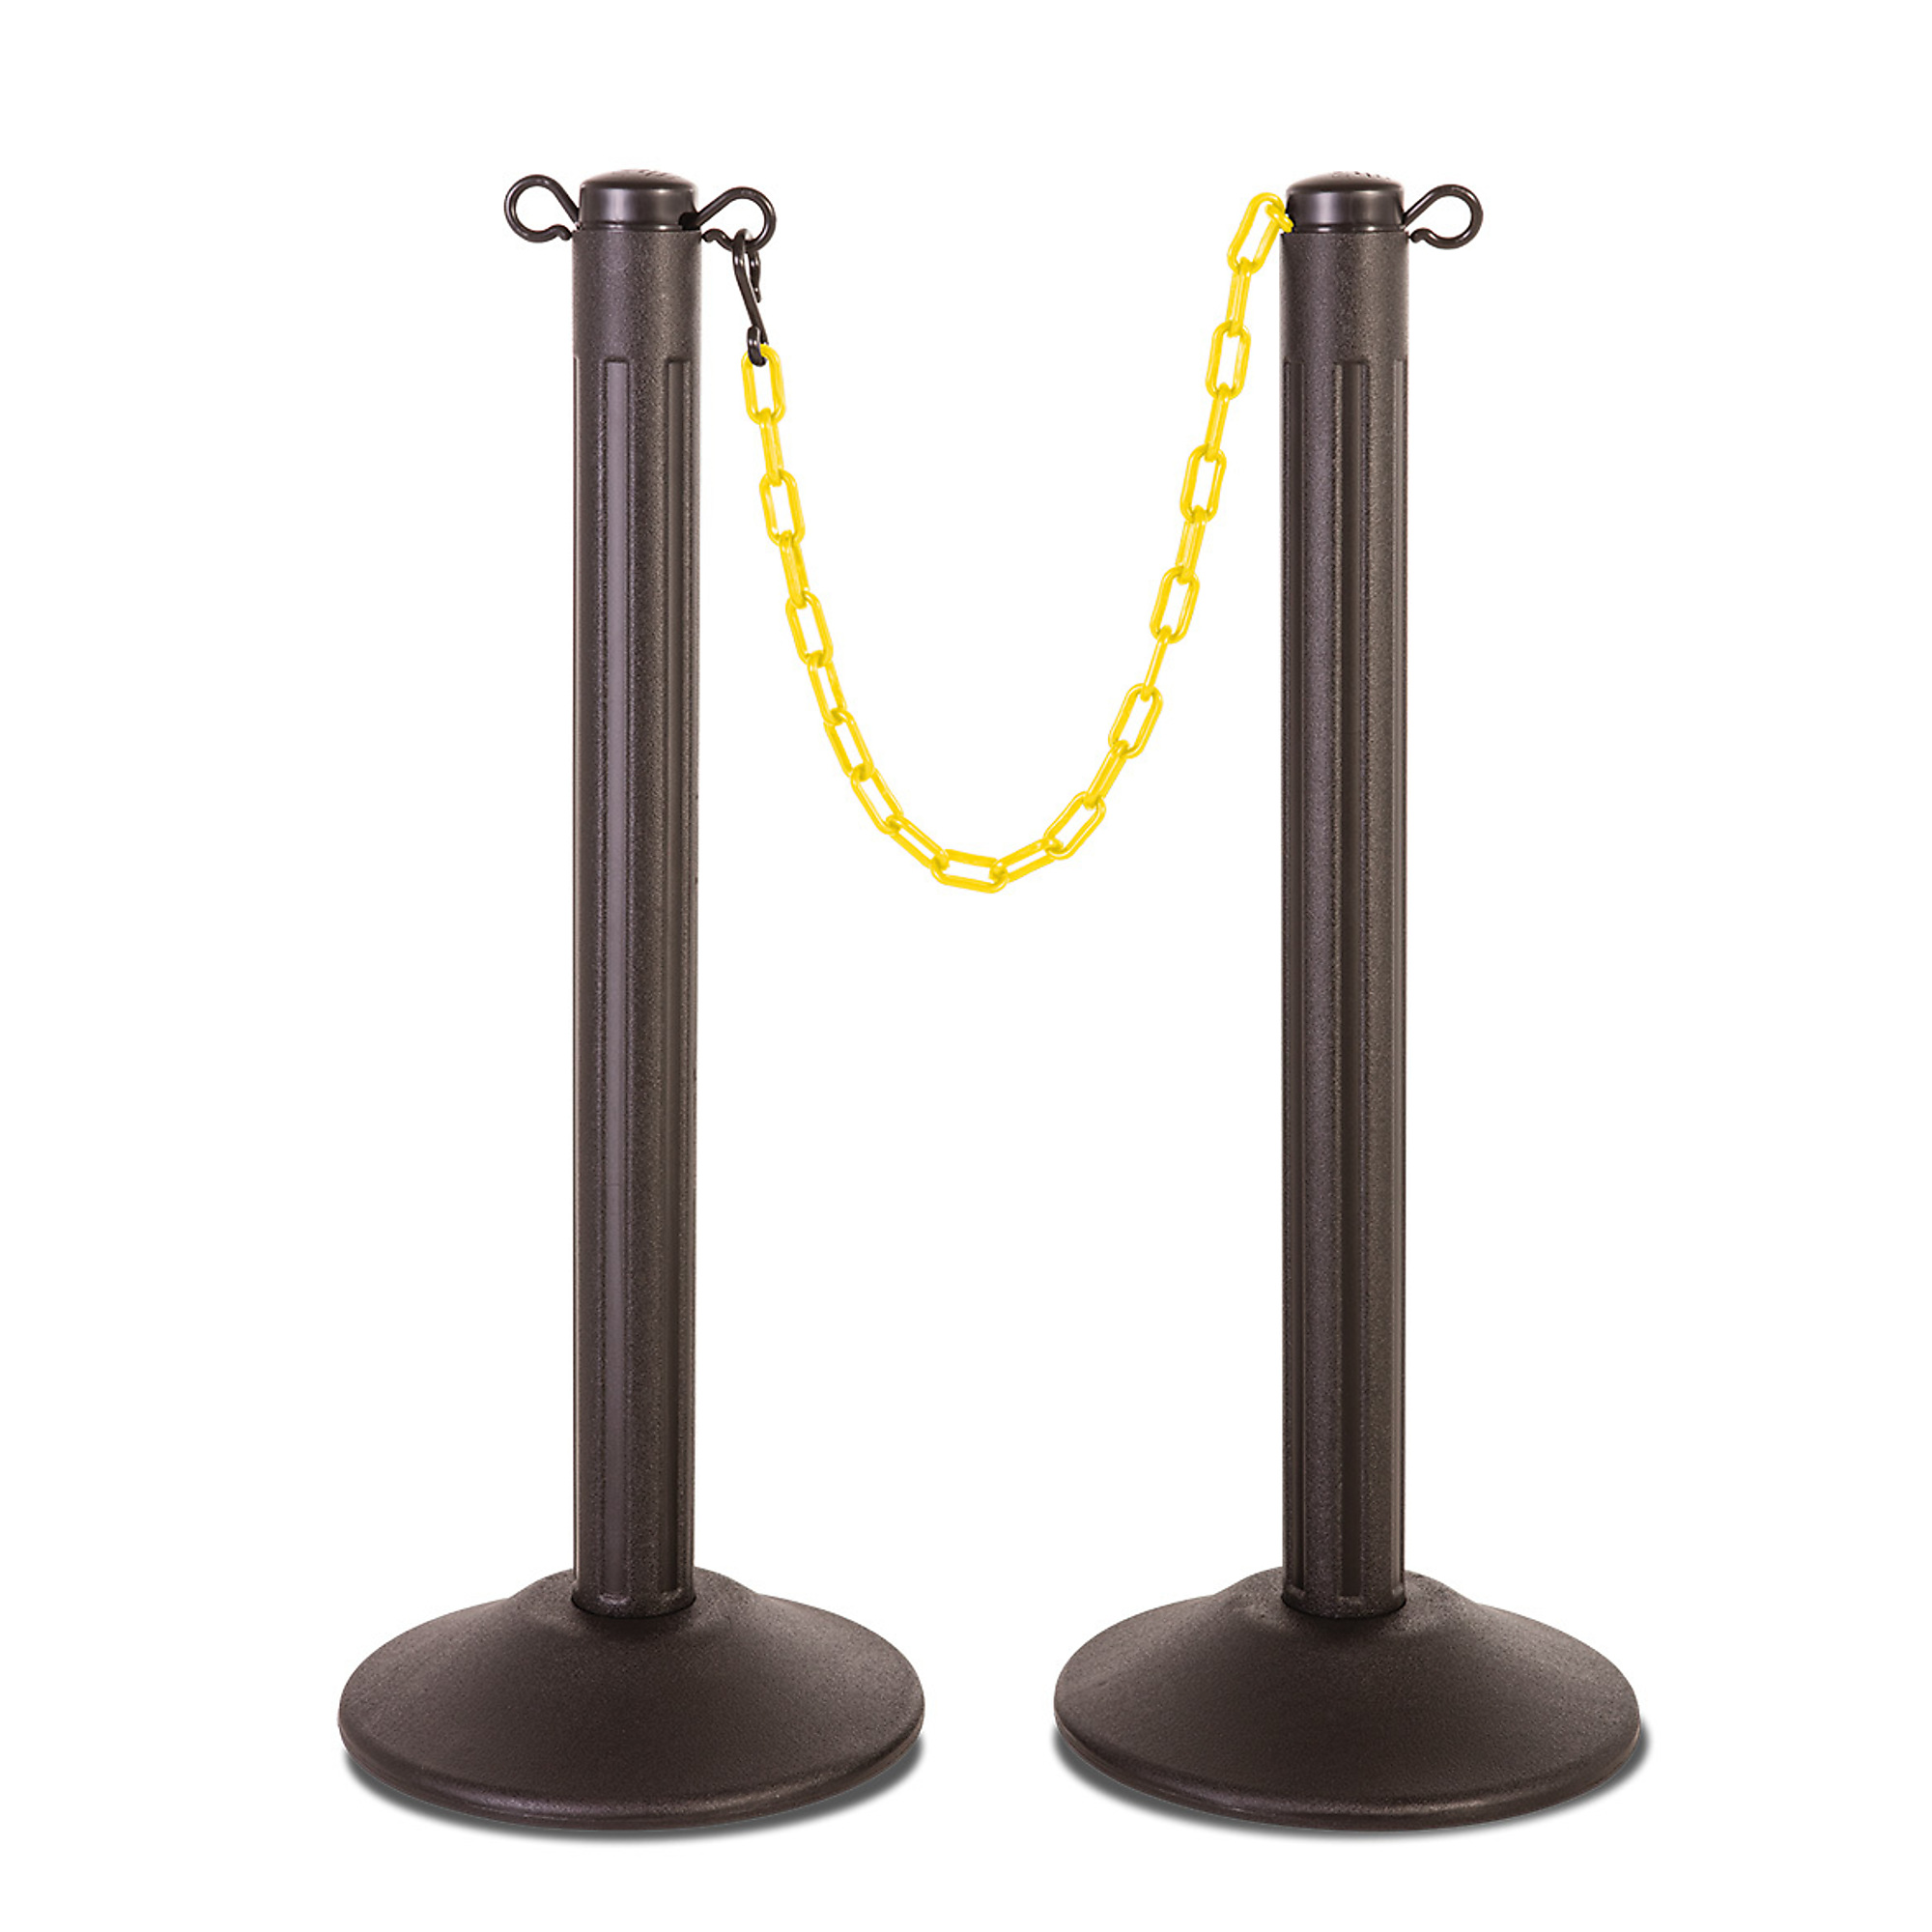 US Weight, Blk post, 10ft. of 2Inch ylw chain weighted base 2pk, Model U2006YC